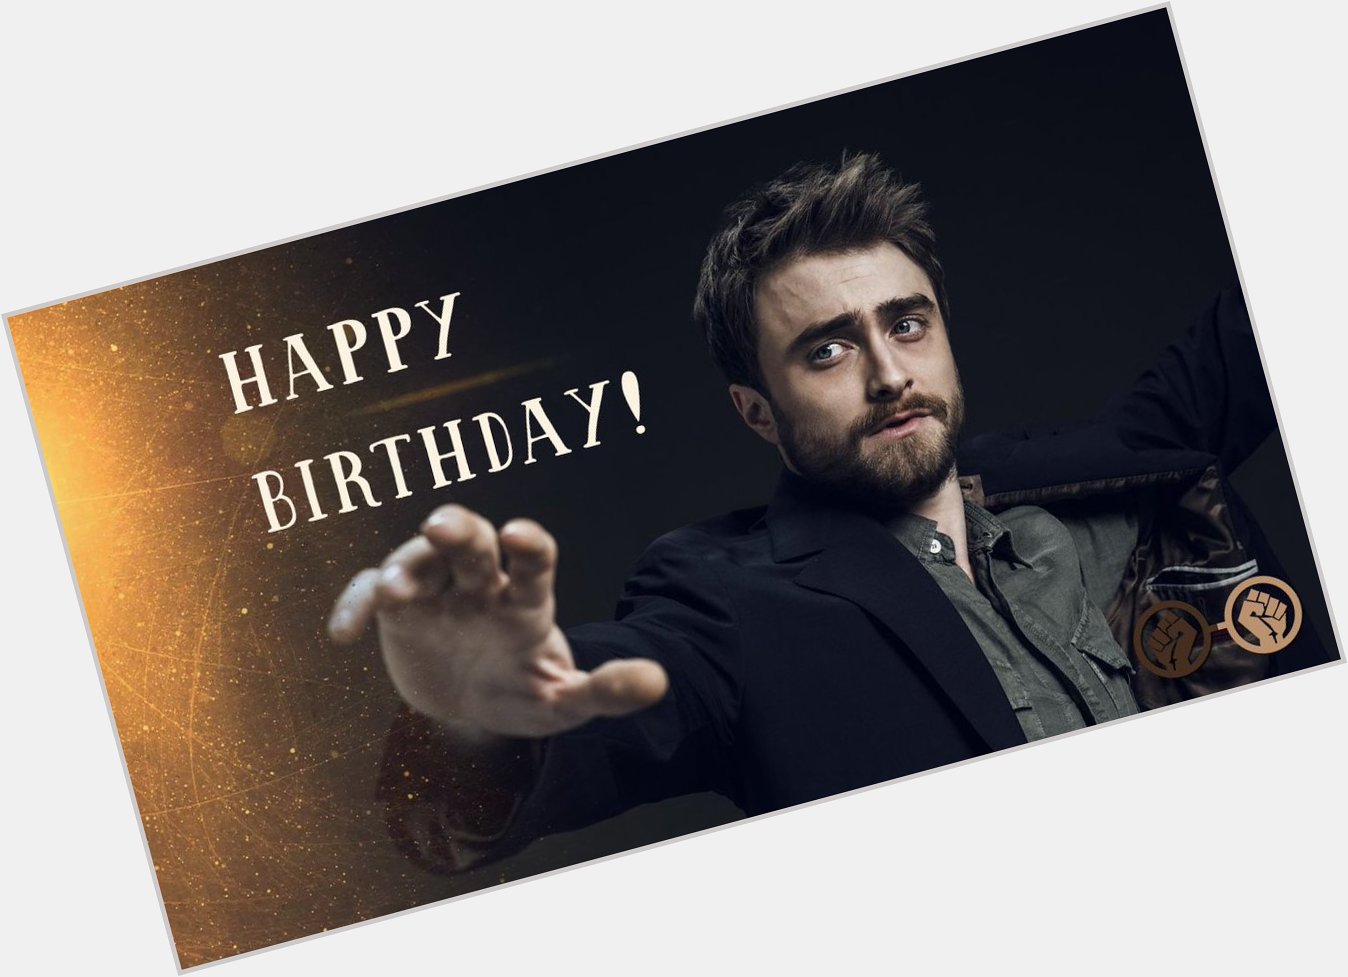 Happy birthday to Harry Potter himself, Daniel Radcliffe! The British actor turns 29 today. 